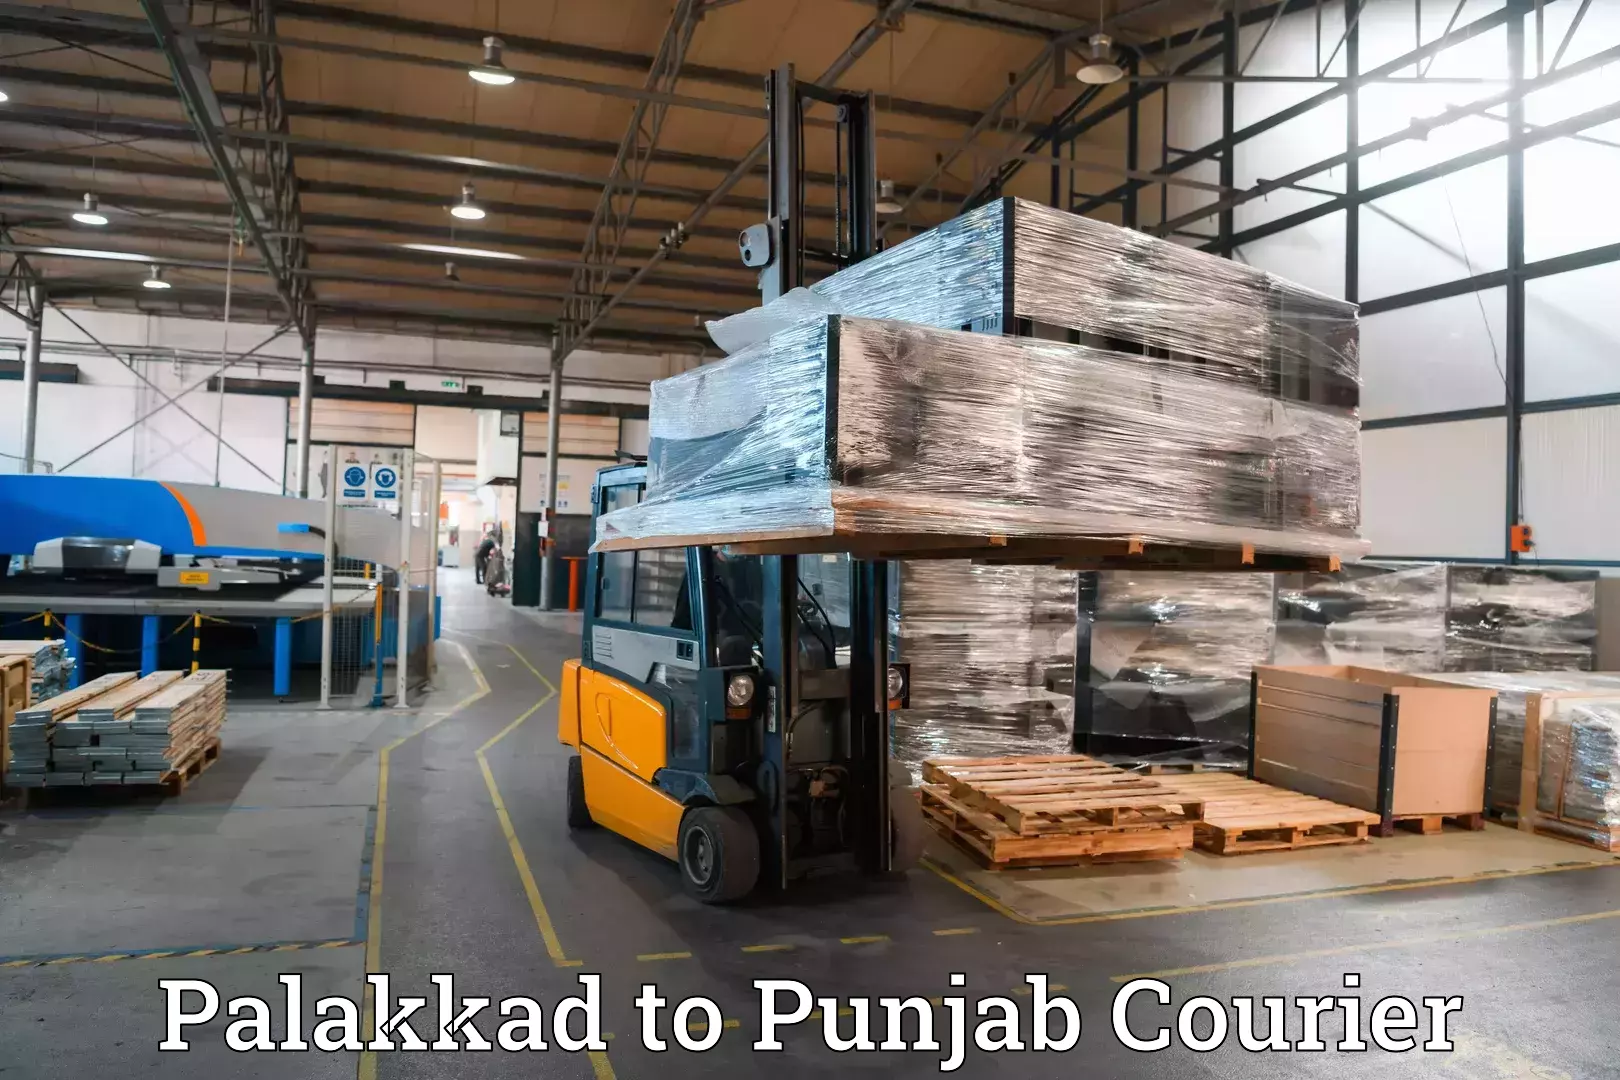 Luggage shipment specialists in Palakkad to Jalandhar